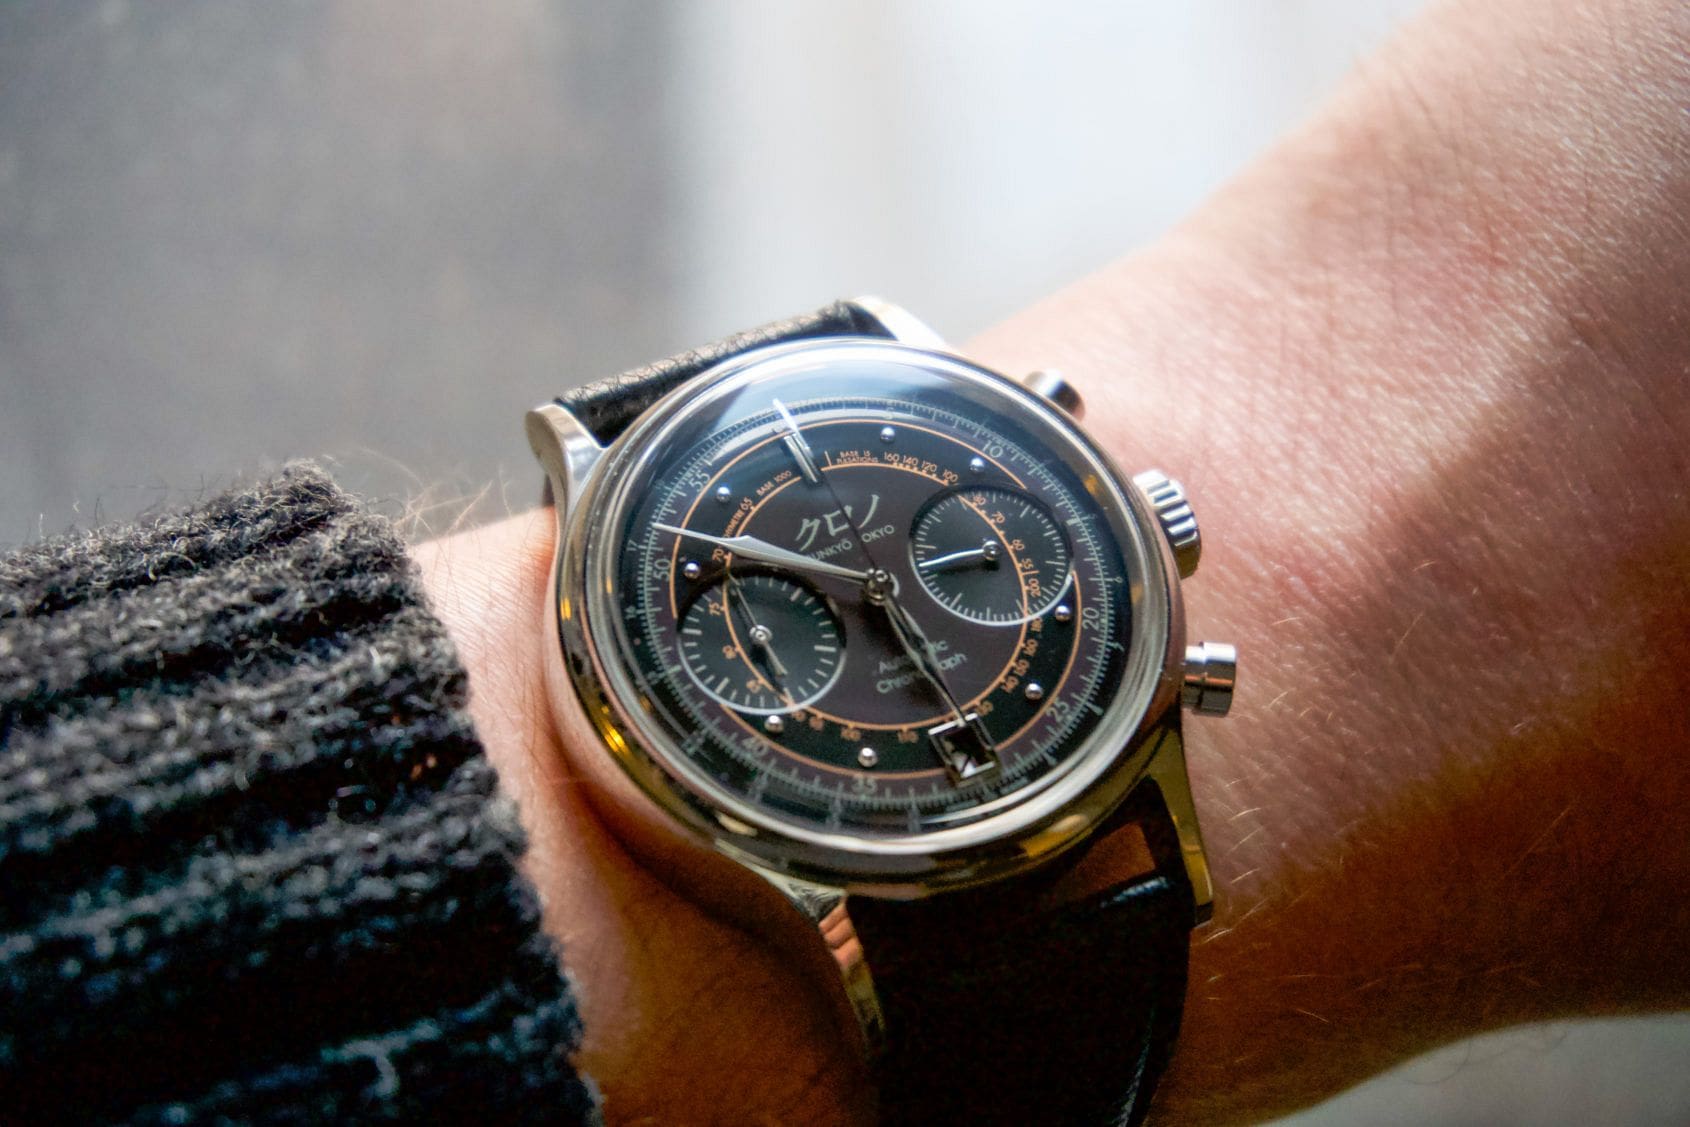 Why I bought the Kurono Chronograph 2 – an owner’s review